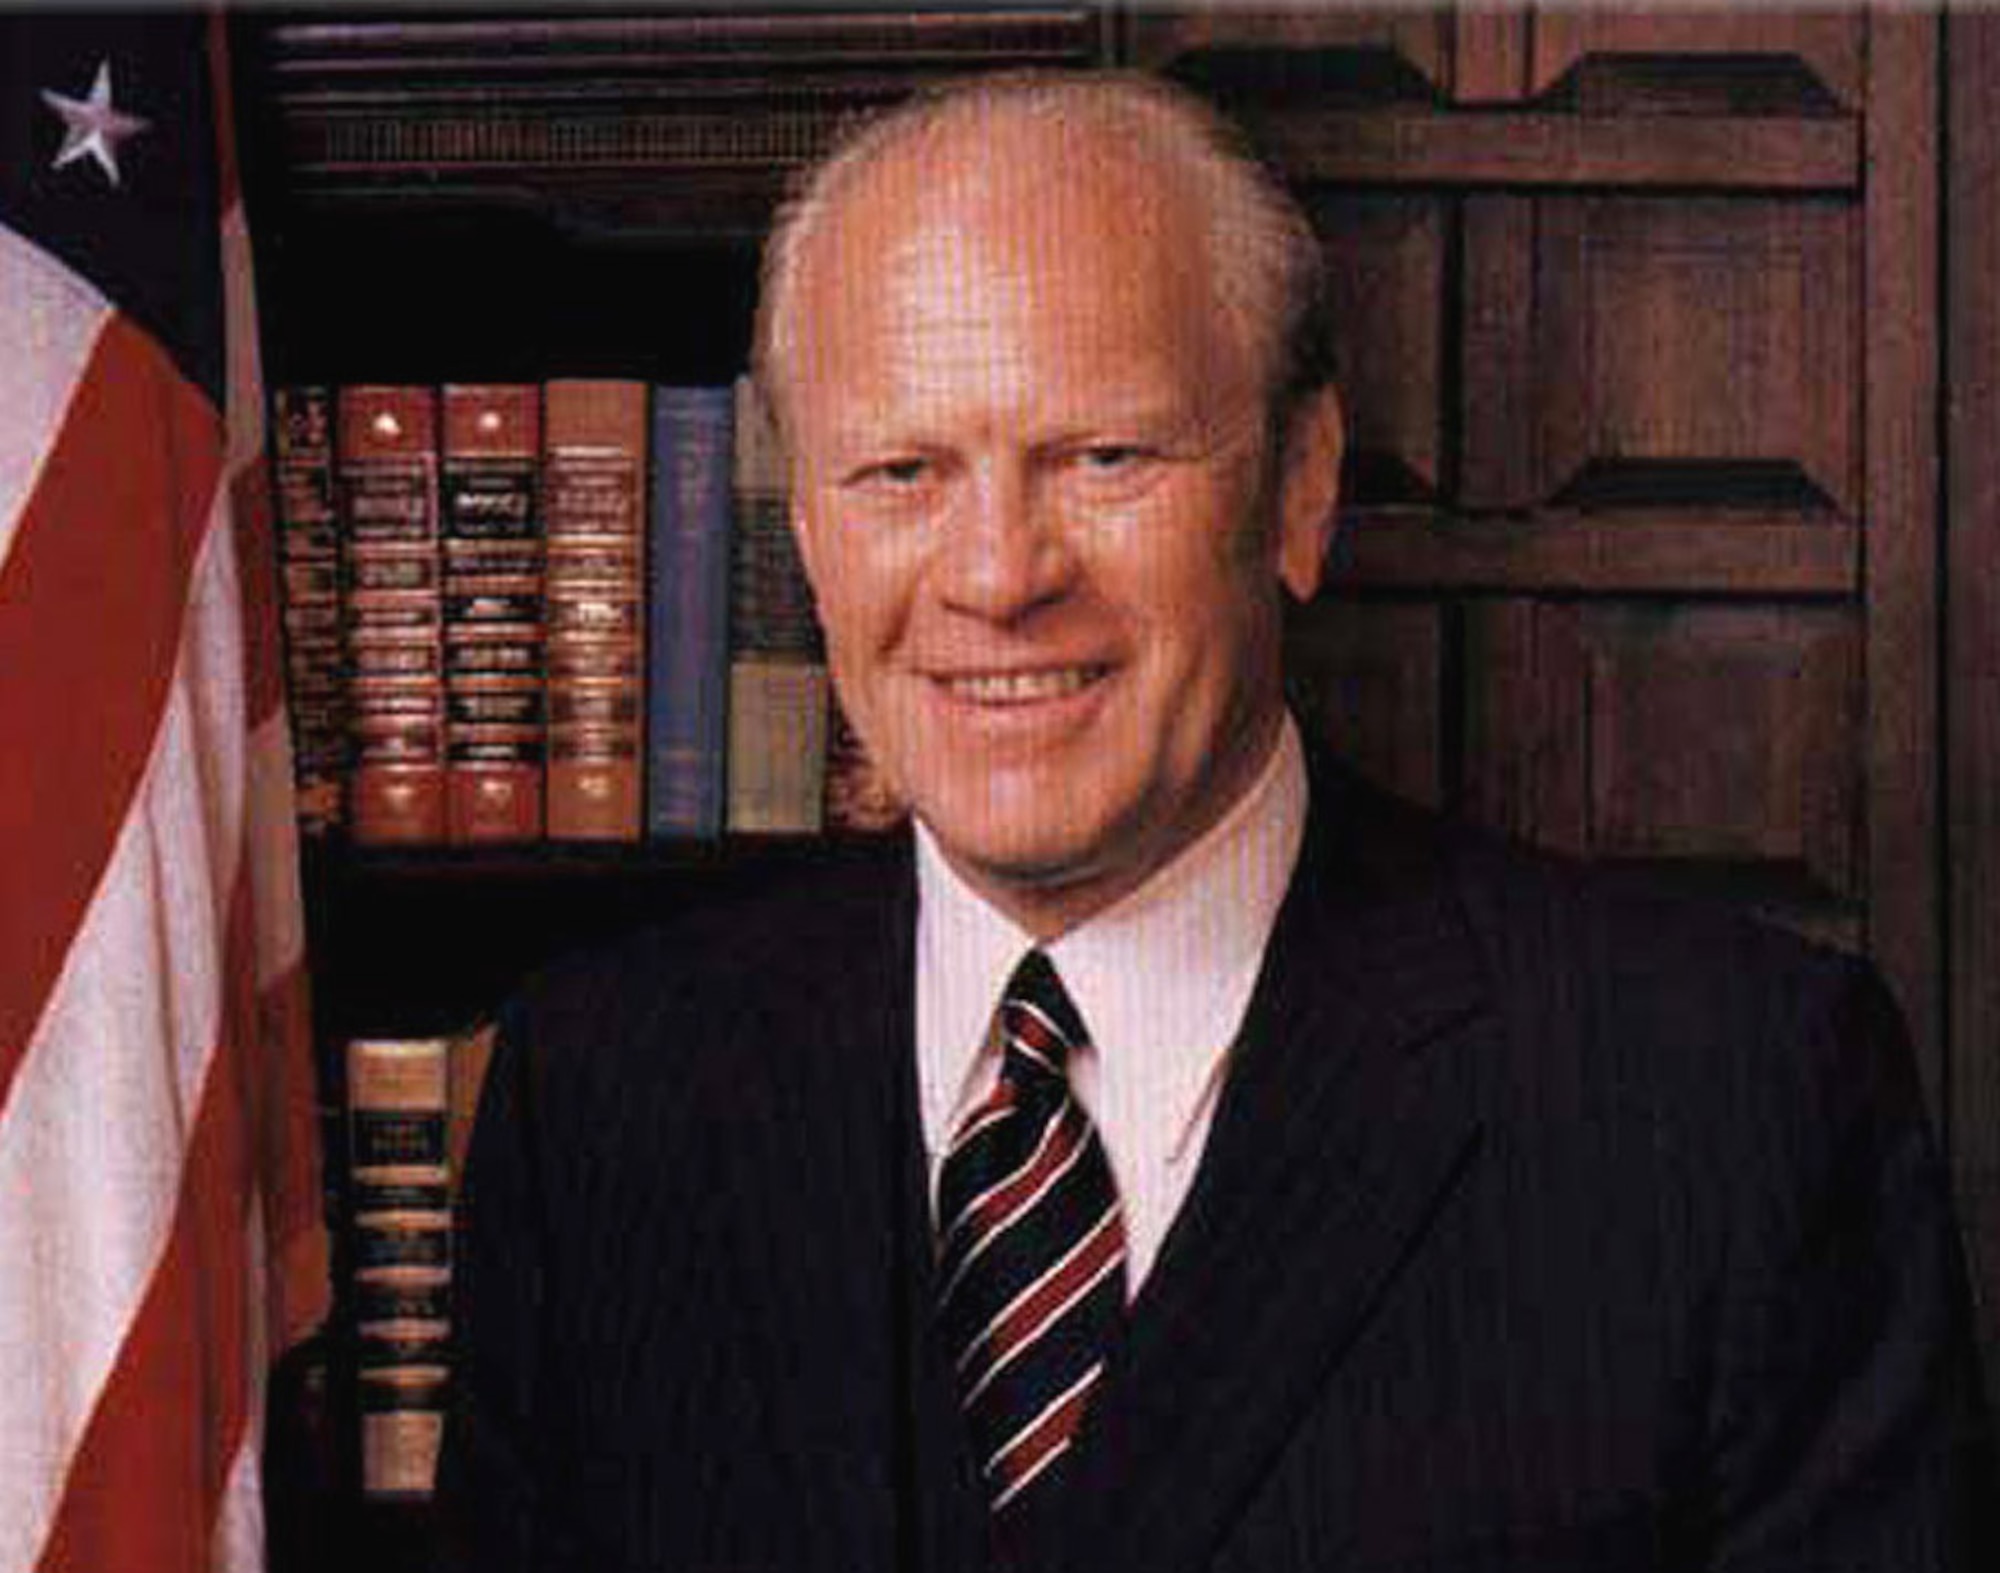 President Gerald R. Ford, 38th president of the United States